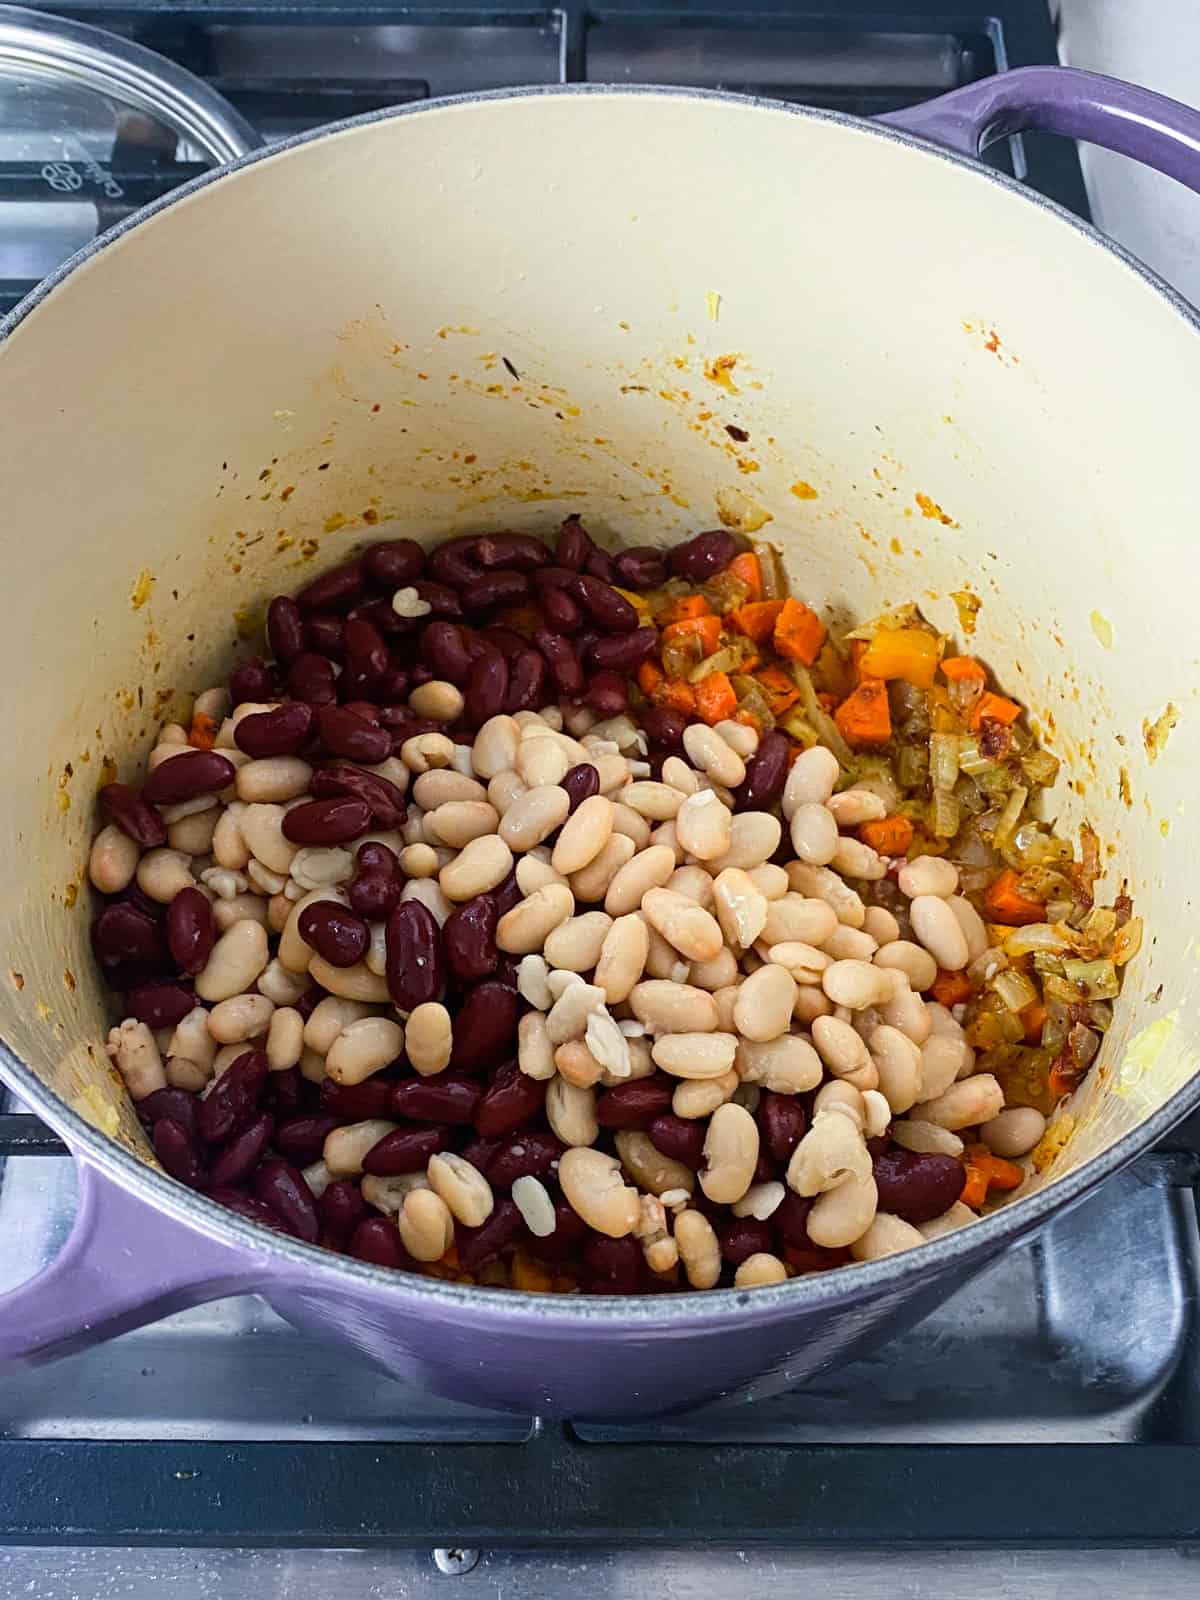 Add kidney beans and white beans to the vegetables.